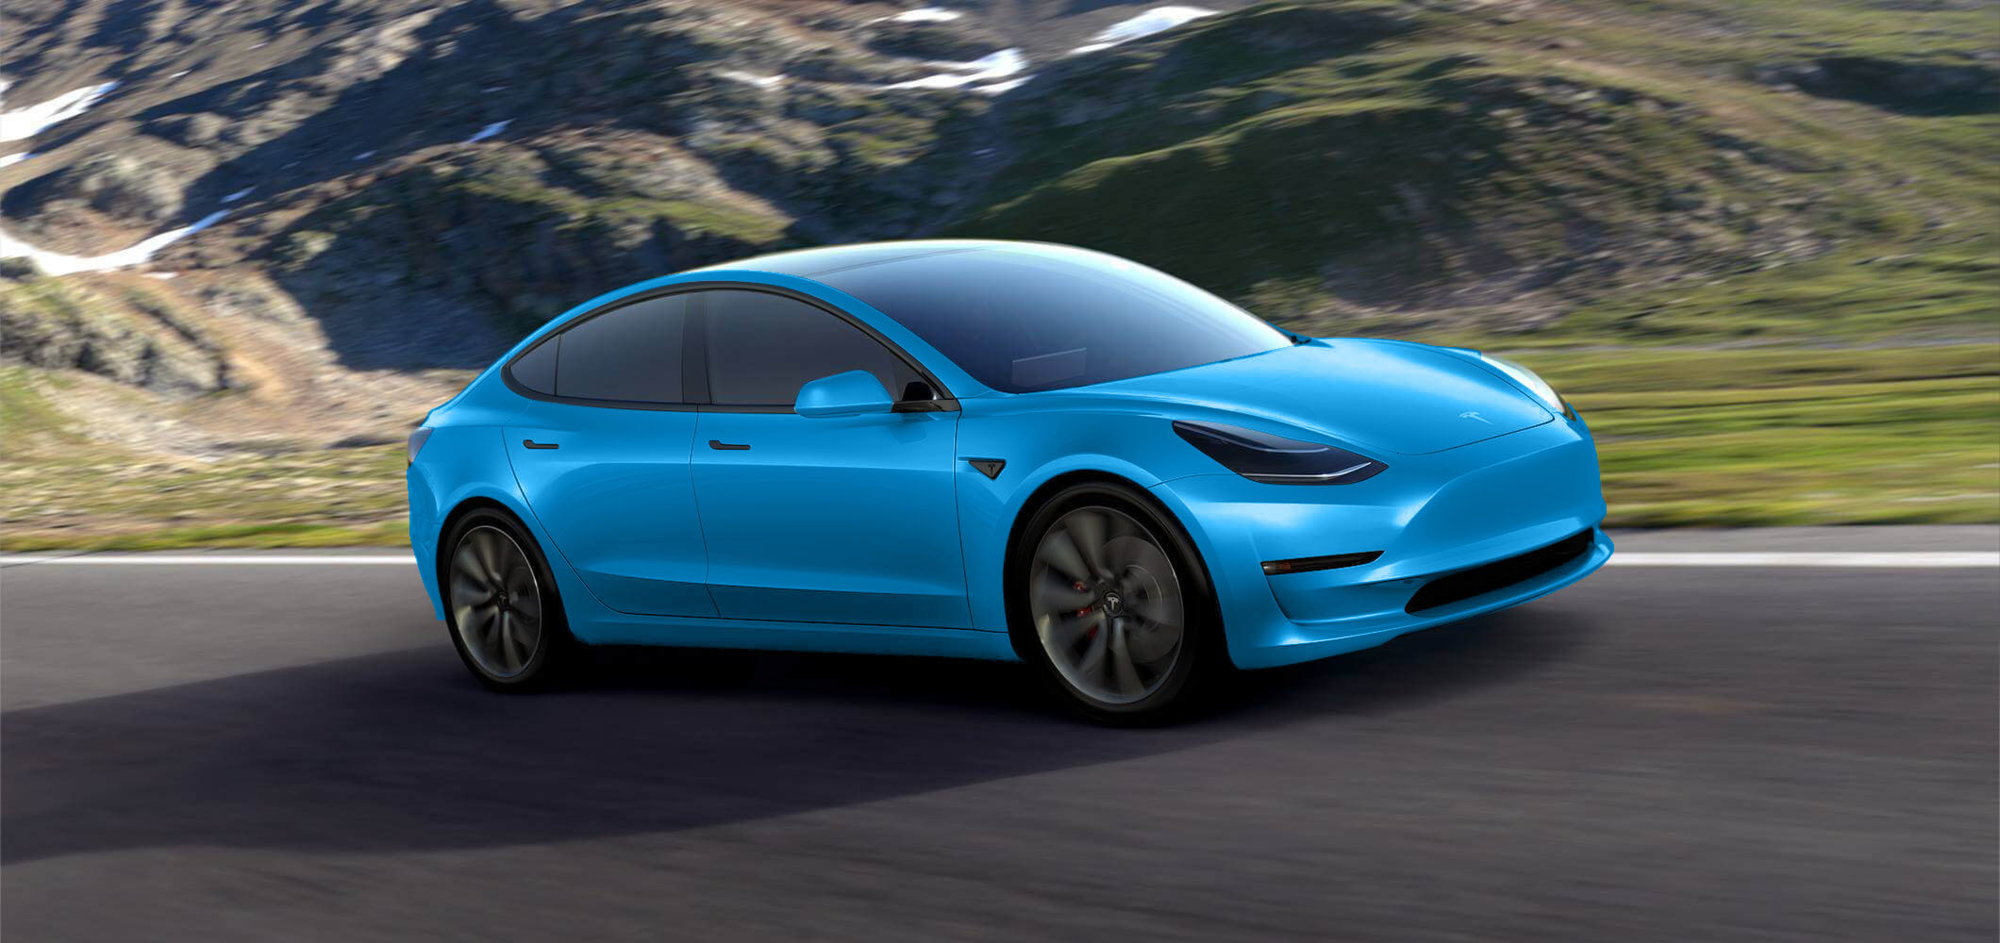 tesla-model-3-gets-rendered-in-dozens-of-colors-looks-good-in-all-of-them-106362_1.jpg